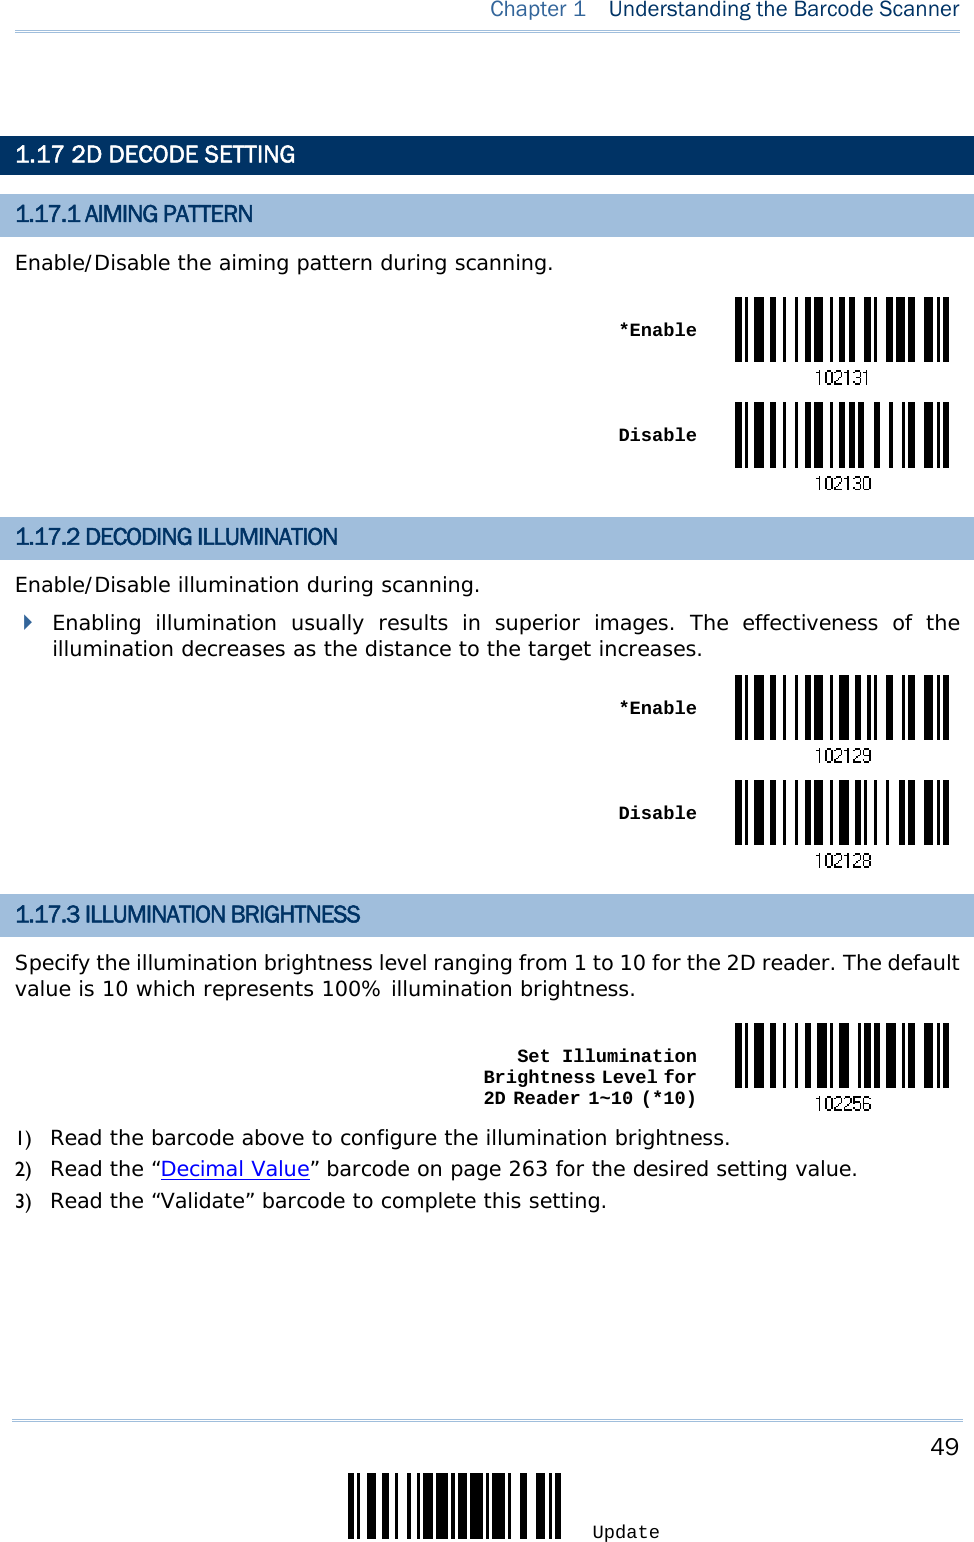     49 Update  Chapter 1   Understanding the Barcode Scanner   1.17 2D DECODE SETTING 1.17.1 AIMING PATTERN Enable/Disable the aiming pattern during scanning.  *Enable Disable1.17.2 DECODING ILLUMINATION Enable/Disable illumination during scanning.  Enabling illumination usually results in superior images. The effectiveness of the illumination decreases as the distance to the target increases.  *Enable Disable1.17.3 ILLUMINATION BRIGHTNESS Specify the illumination brightness level ranging from 1 to 10 for the 2D reader. The default value is 10 which represents 100% illumination brightness.  Set Illumination Brightness Level for 2D Reader 1~10 (*10)1) Read the barcode above to configure the illumination brightness. 2) Read the “Decimal Value” barcode on page 263 for the desired setting value. 3) Read the “Validate” barcode to complete this setting.    